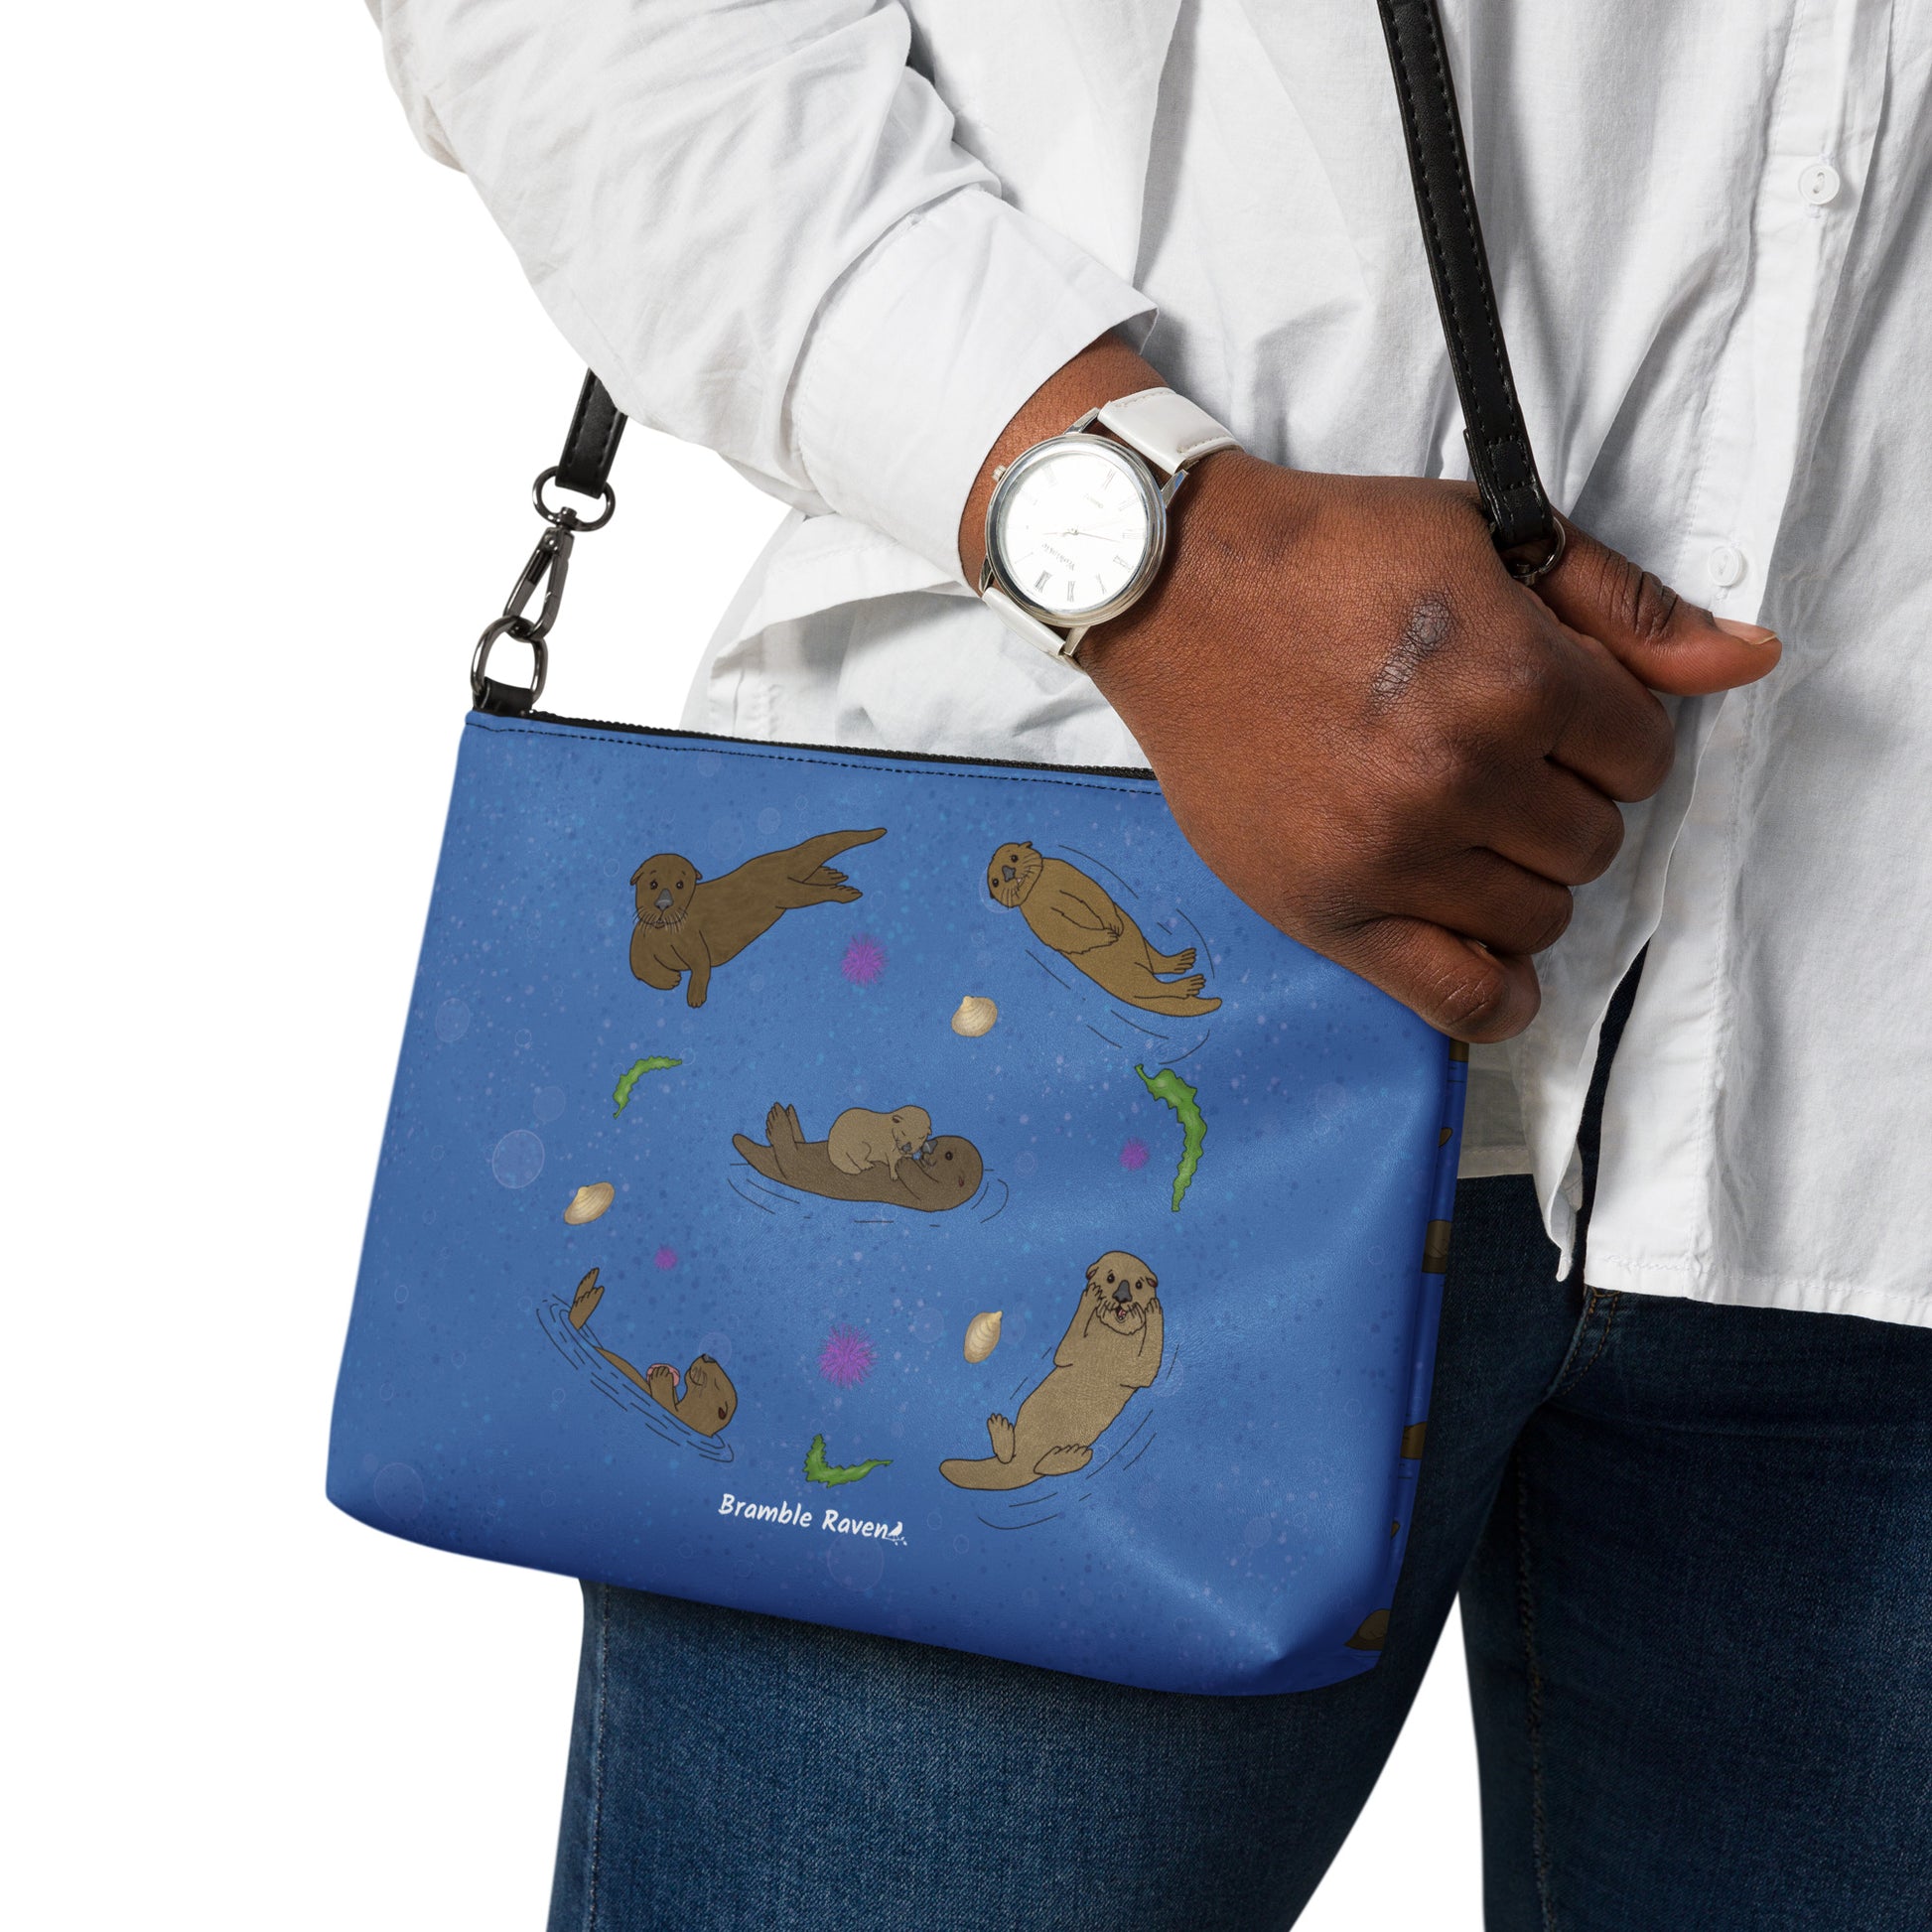 Sea Otter crossbody bag. Faux leather with polyester lining and dark grey hardware. Comes with adjustable removable wrist and shoulder straps. Front view of bag with a circle of sea otters on a dark blue background. Shown on model's shoulder.